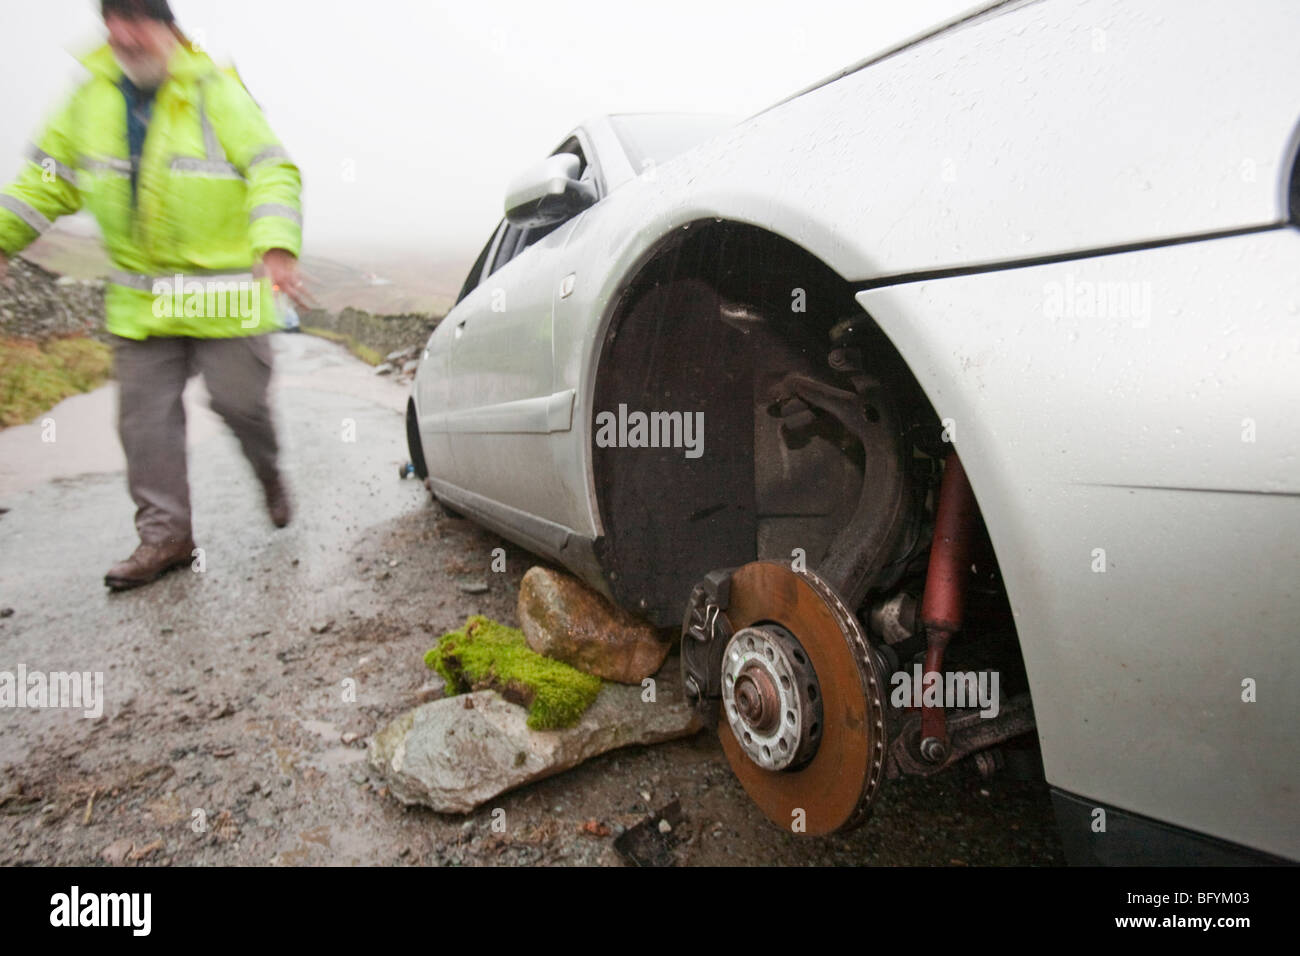 Recovering a car that had its wheels stolen after being abandoned in flood waters near Ambleside, Cumbria, UK. Stock Photo